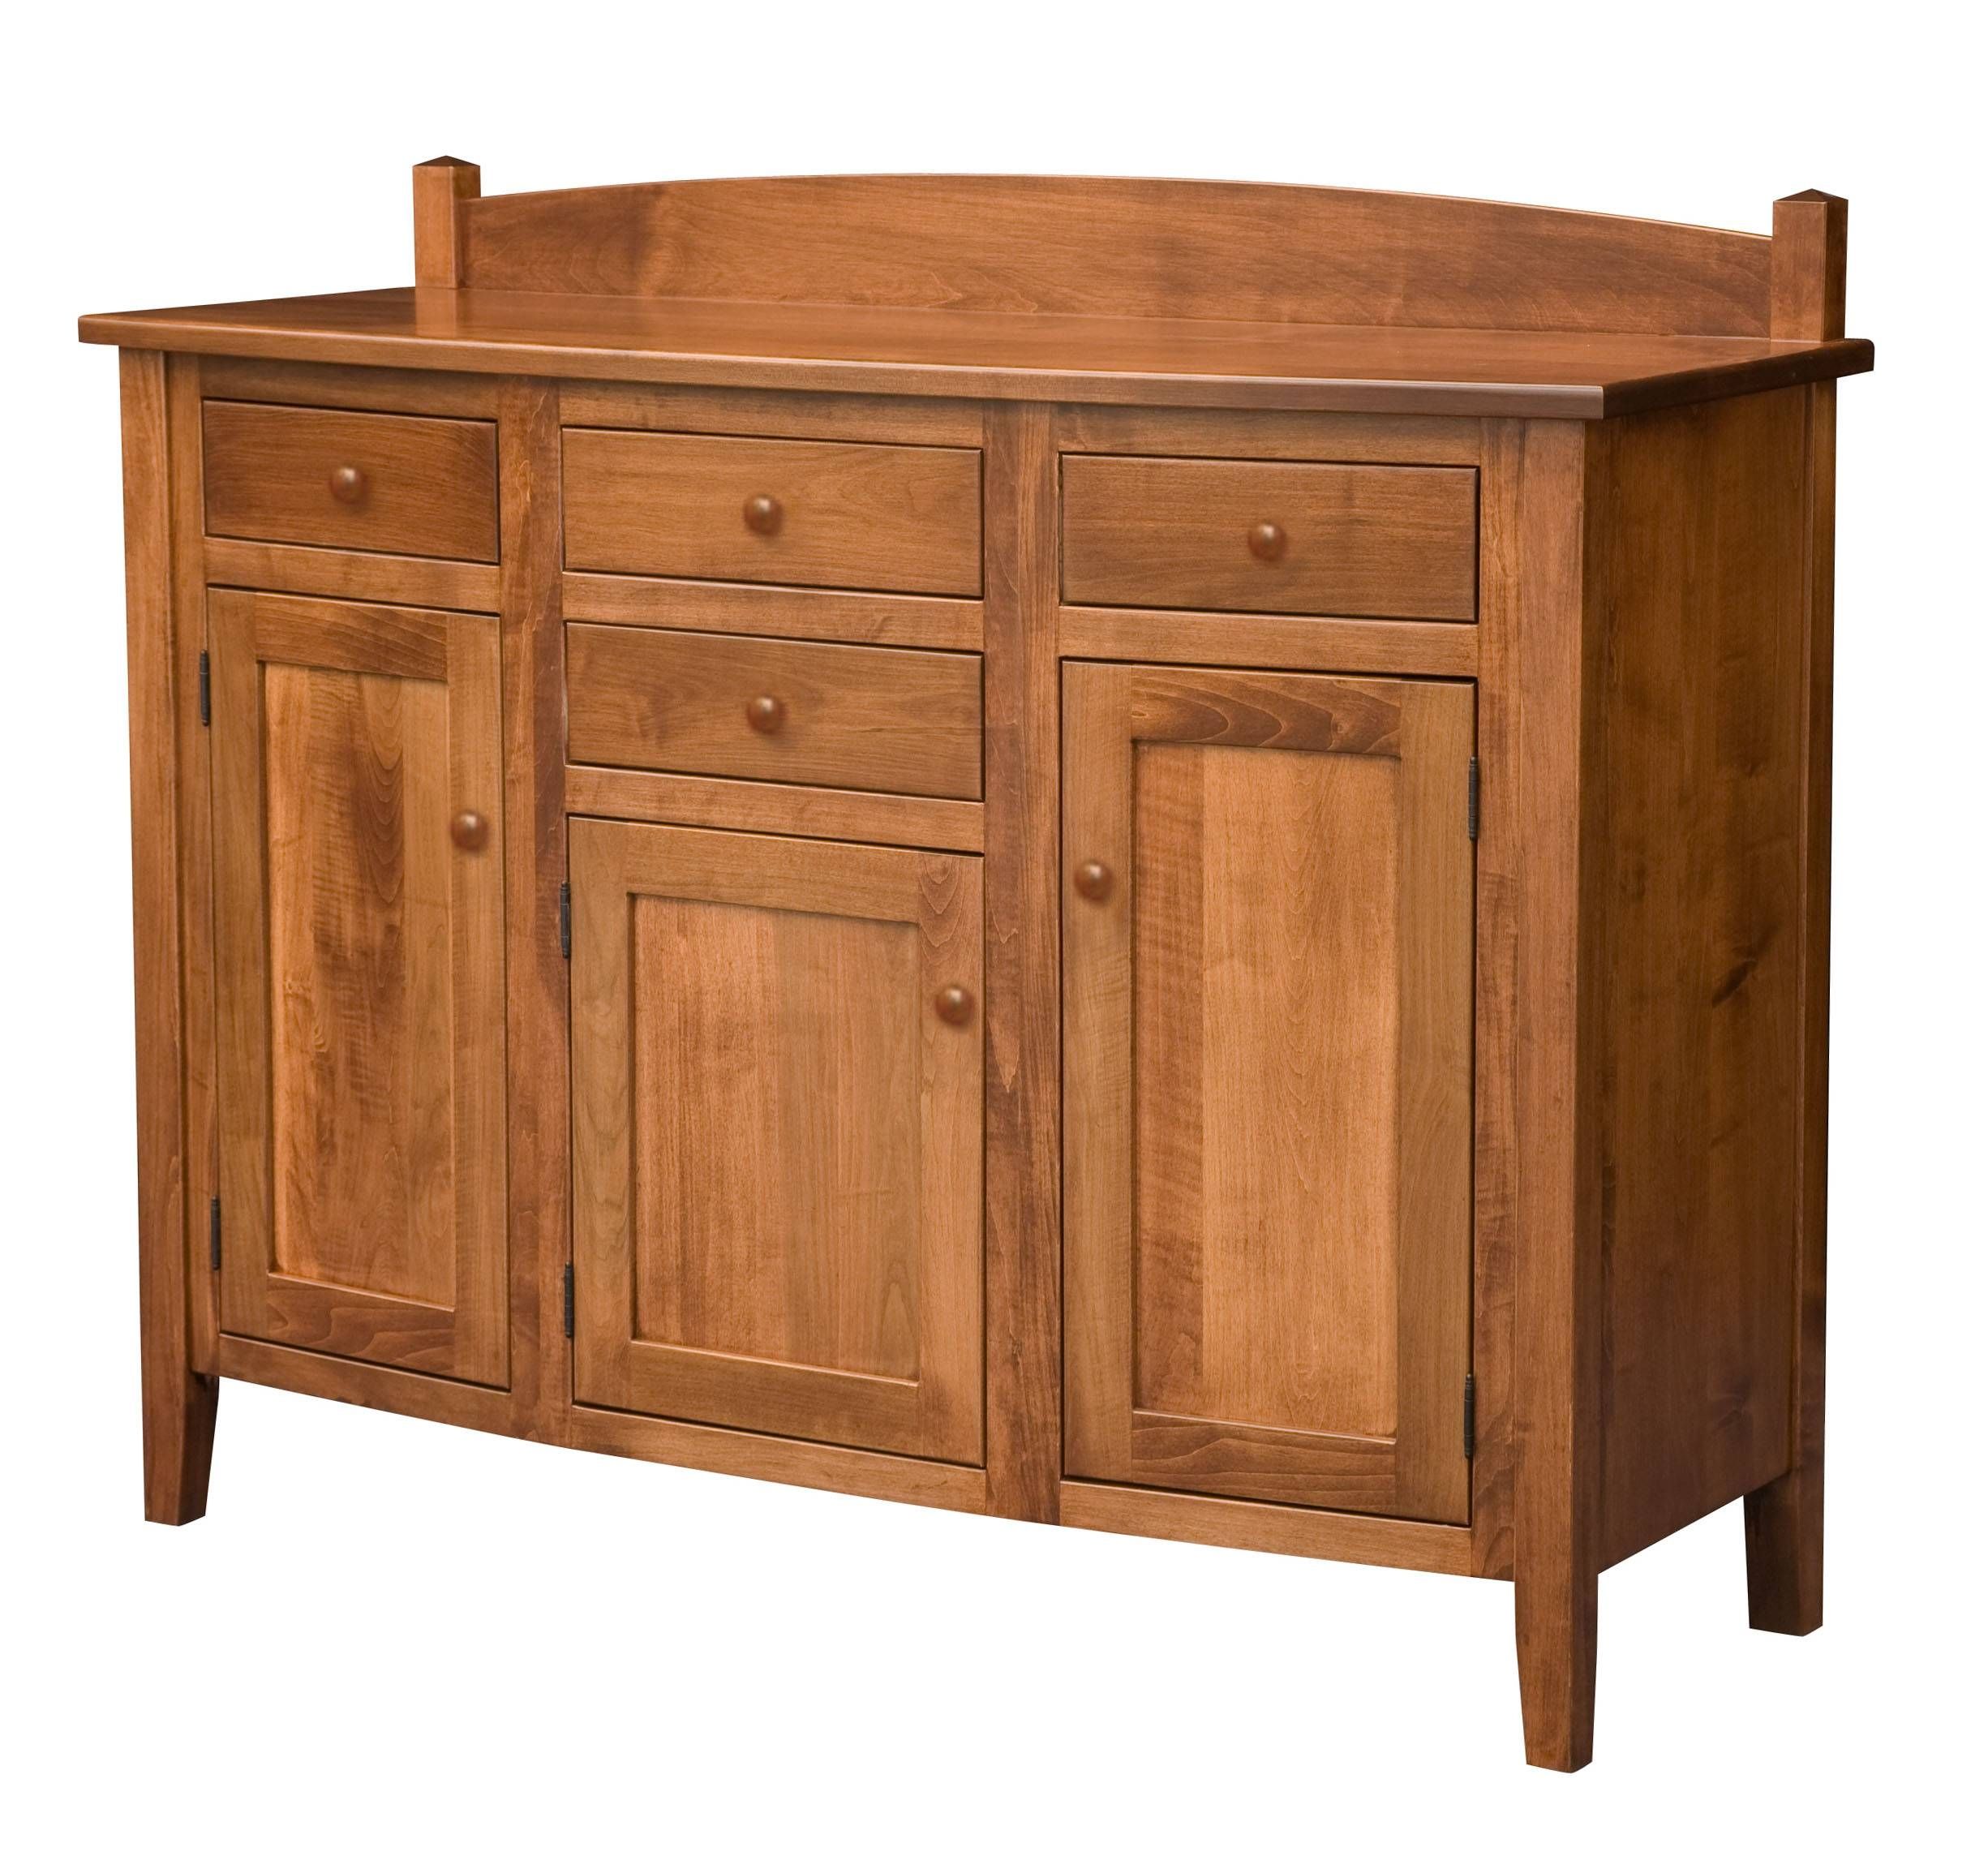 Furniture. Elegant Dining Room Buffets Sideboards Design | Sipfon With Unfinished Sideboards (Photo 13 of 20)